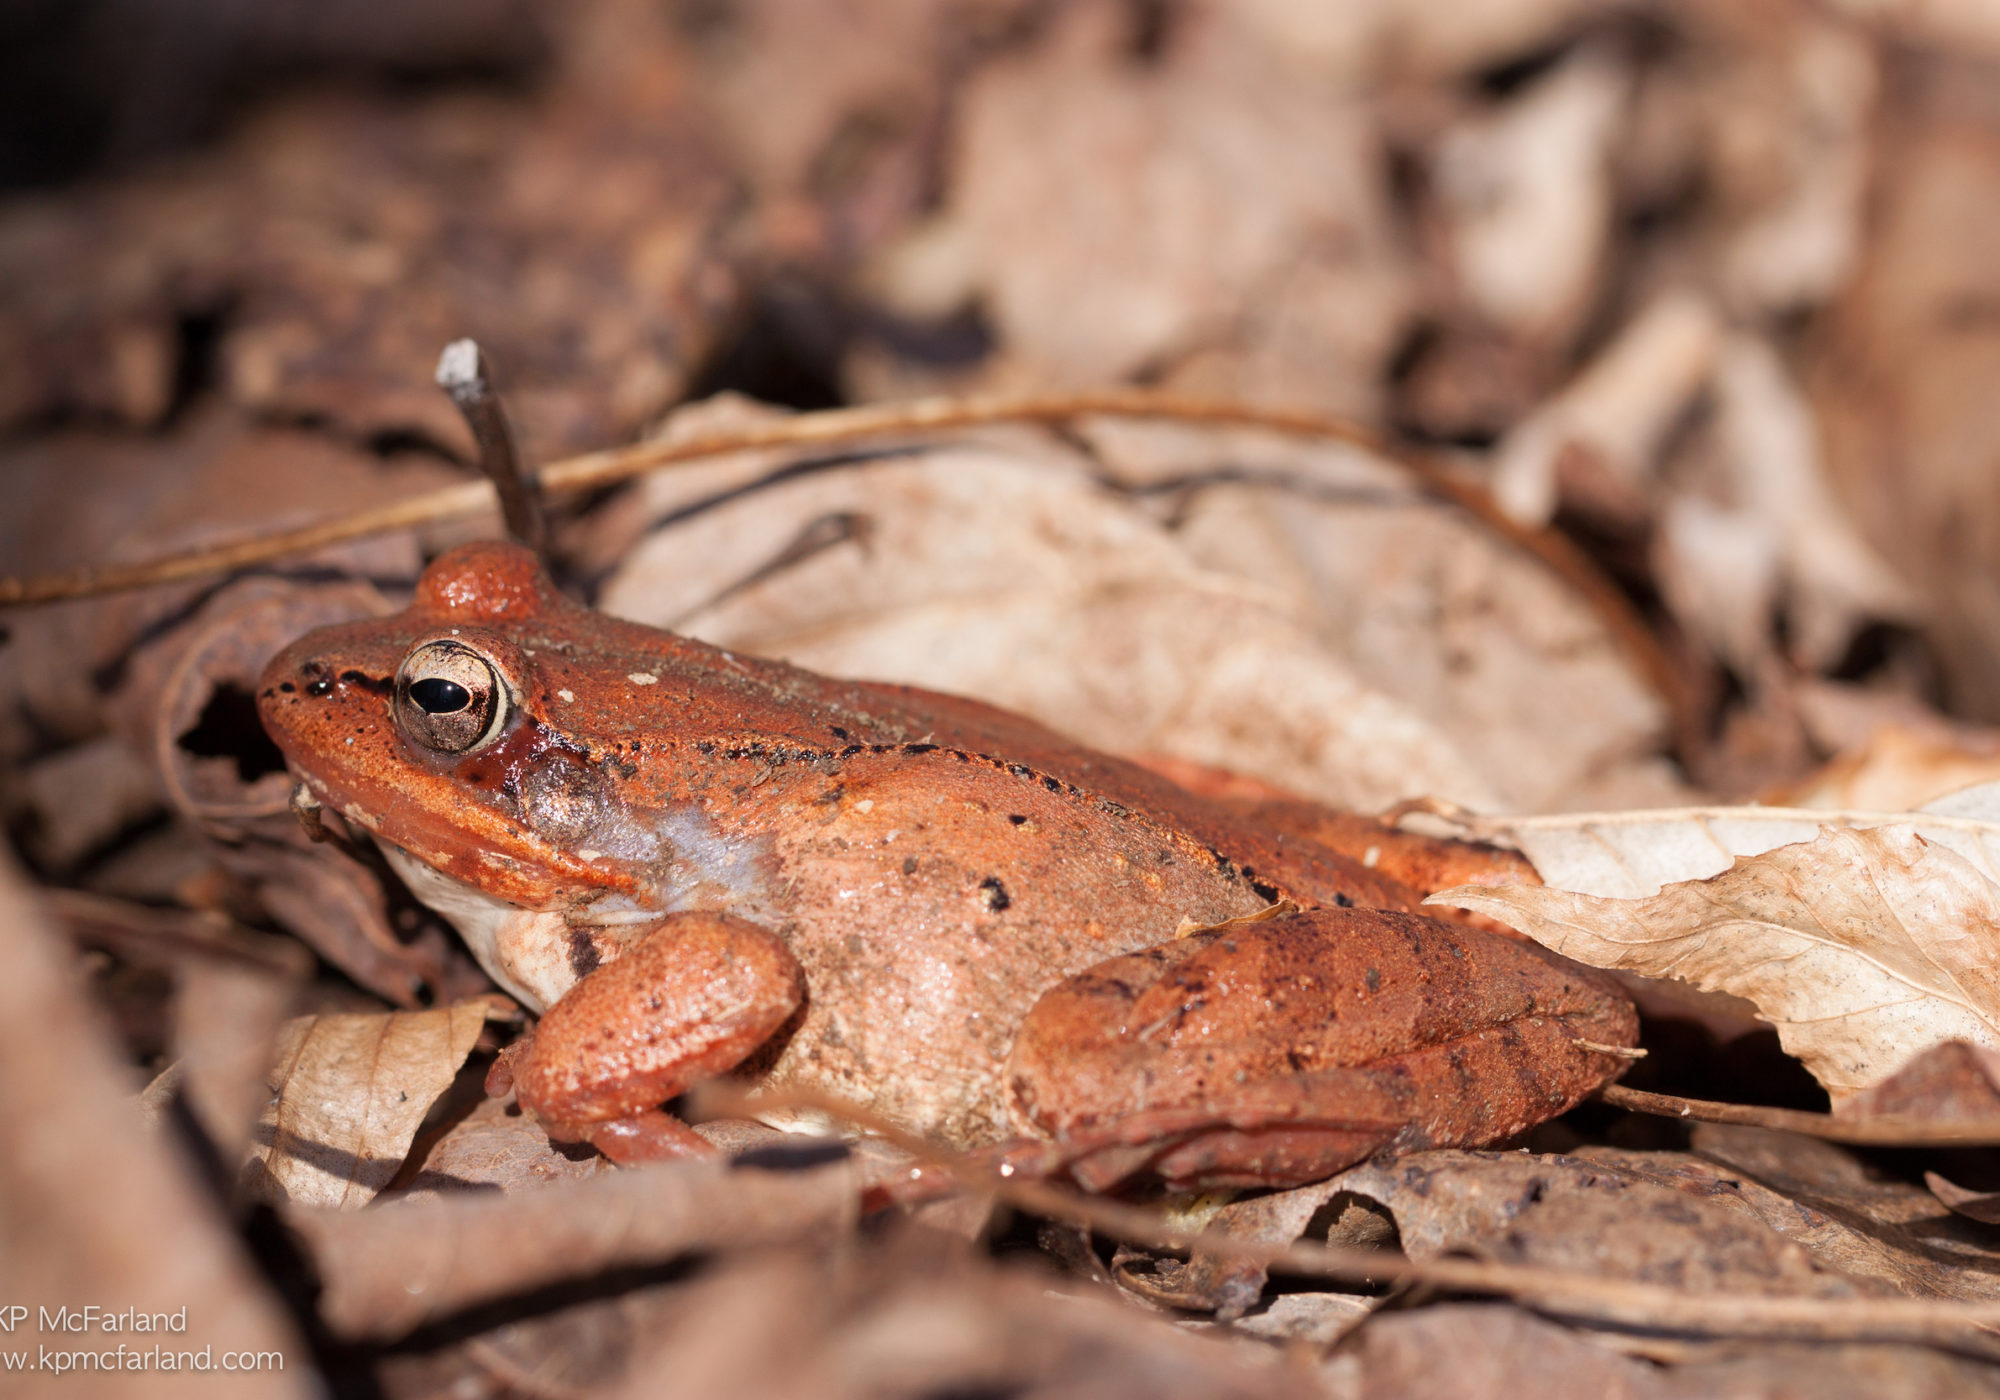 Wood Frog newly emerged in spring from a long winter nap. K.P. McFarland